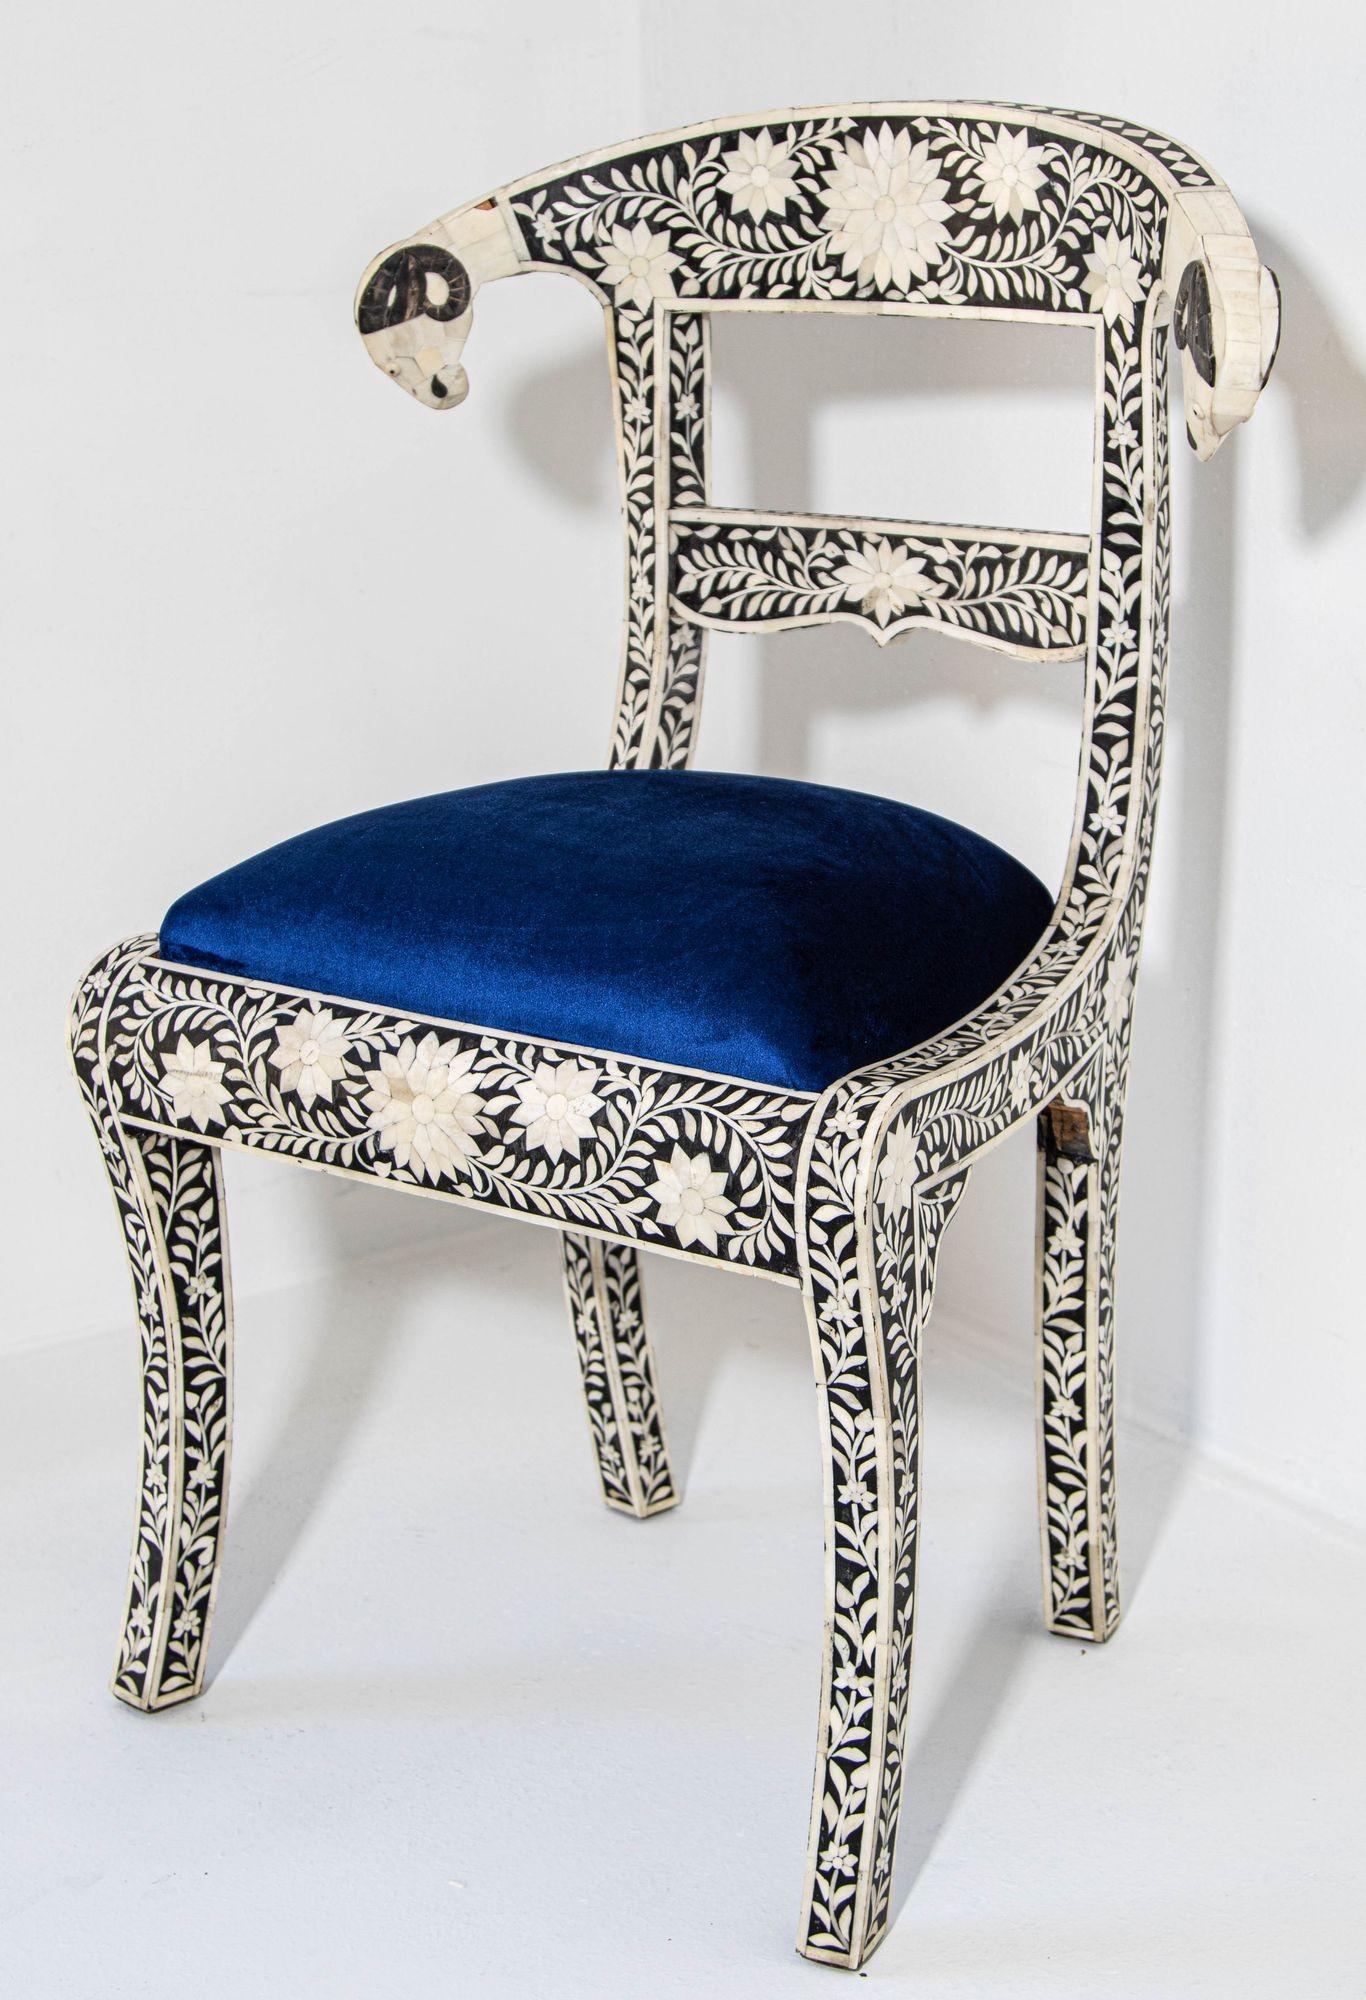 Antique Anglo-Indian Side Chairs with Ram's Head Bone Inlay Royal Blue Seat Pair For Sale 13